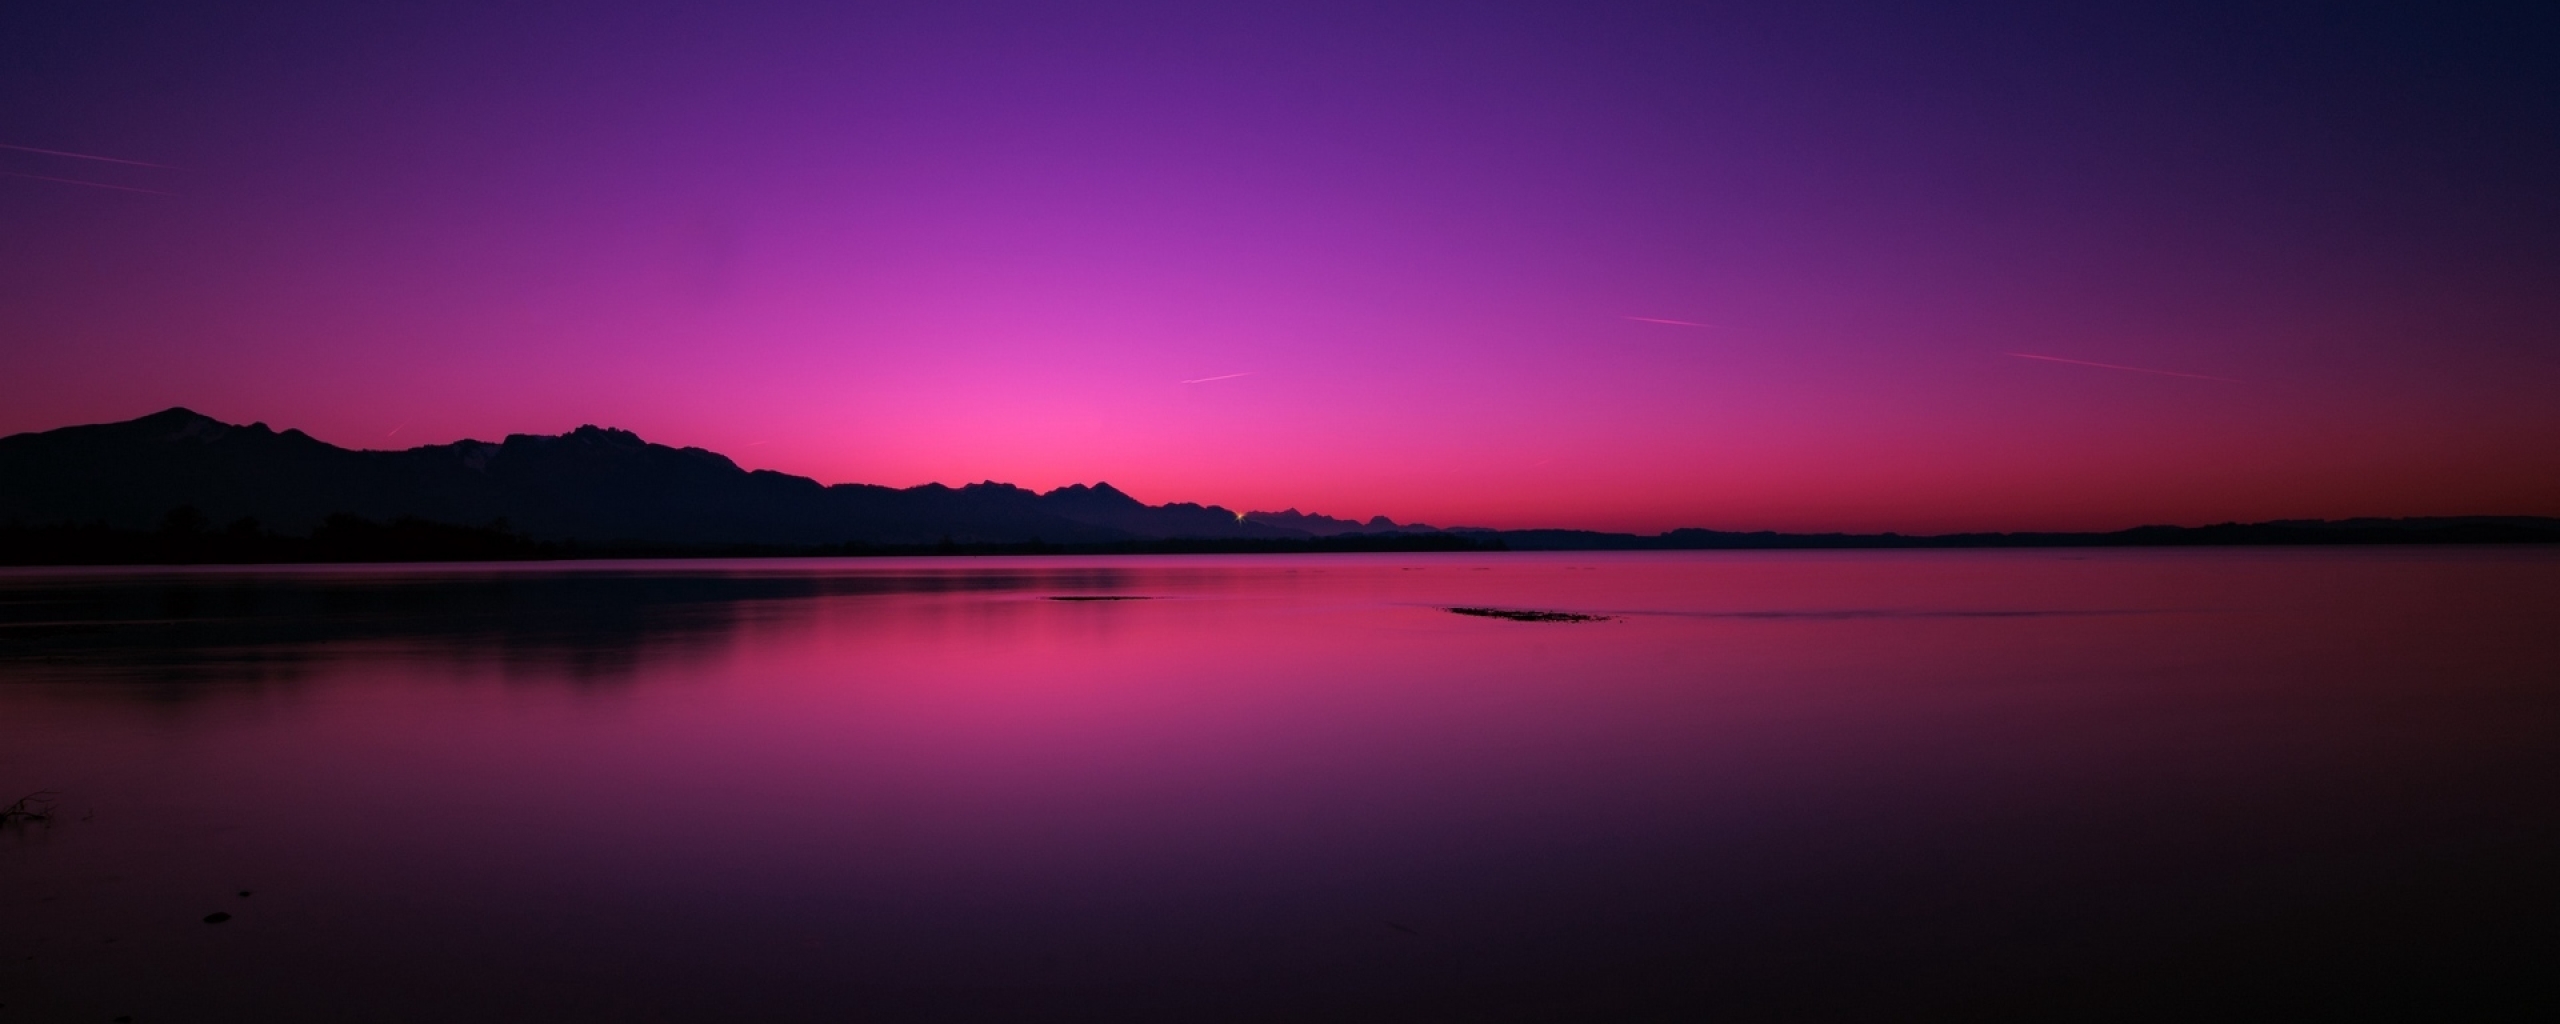 2560x1024 Pink Purple Sunset Near Lake 2560x1024 Resolution Wallpaper, HD  Nature 4K Wallpapers, Images, Photos and Background - Wallpapers Den